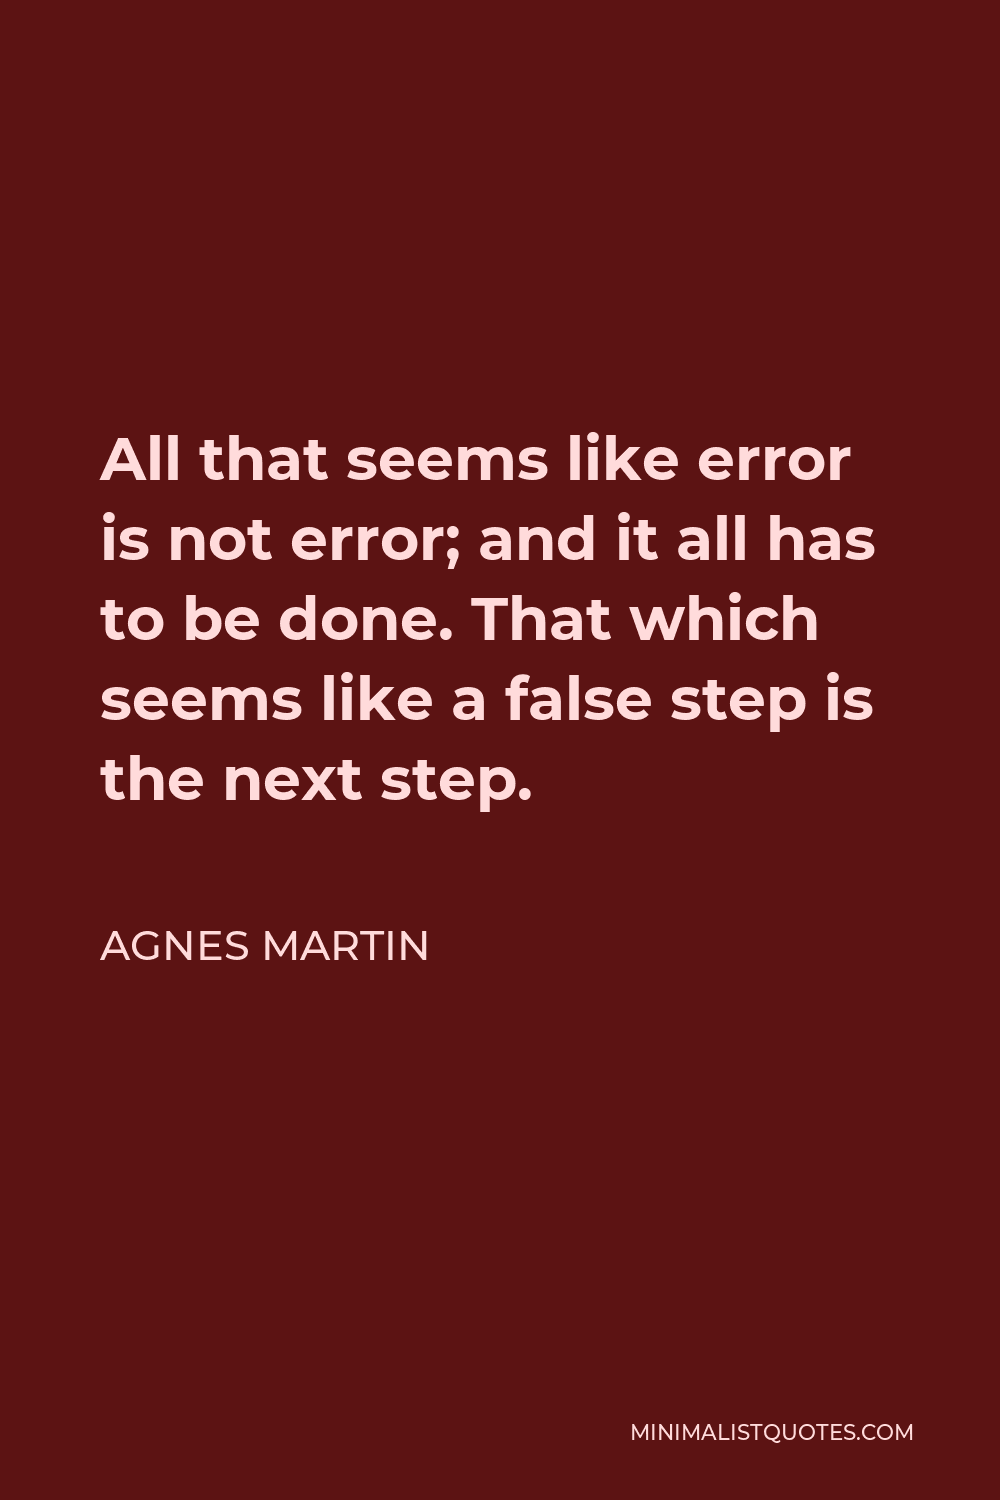 Agnes Martin Quote - All that seems like error is not error; and it all has to be done. That which seems like a false step is the next step.